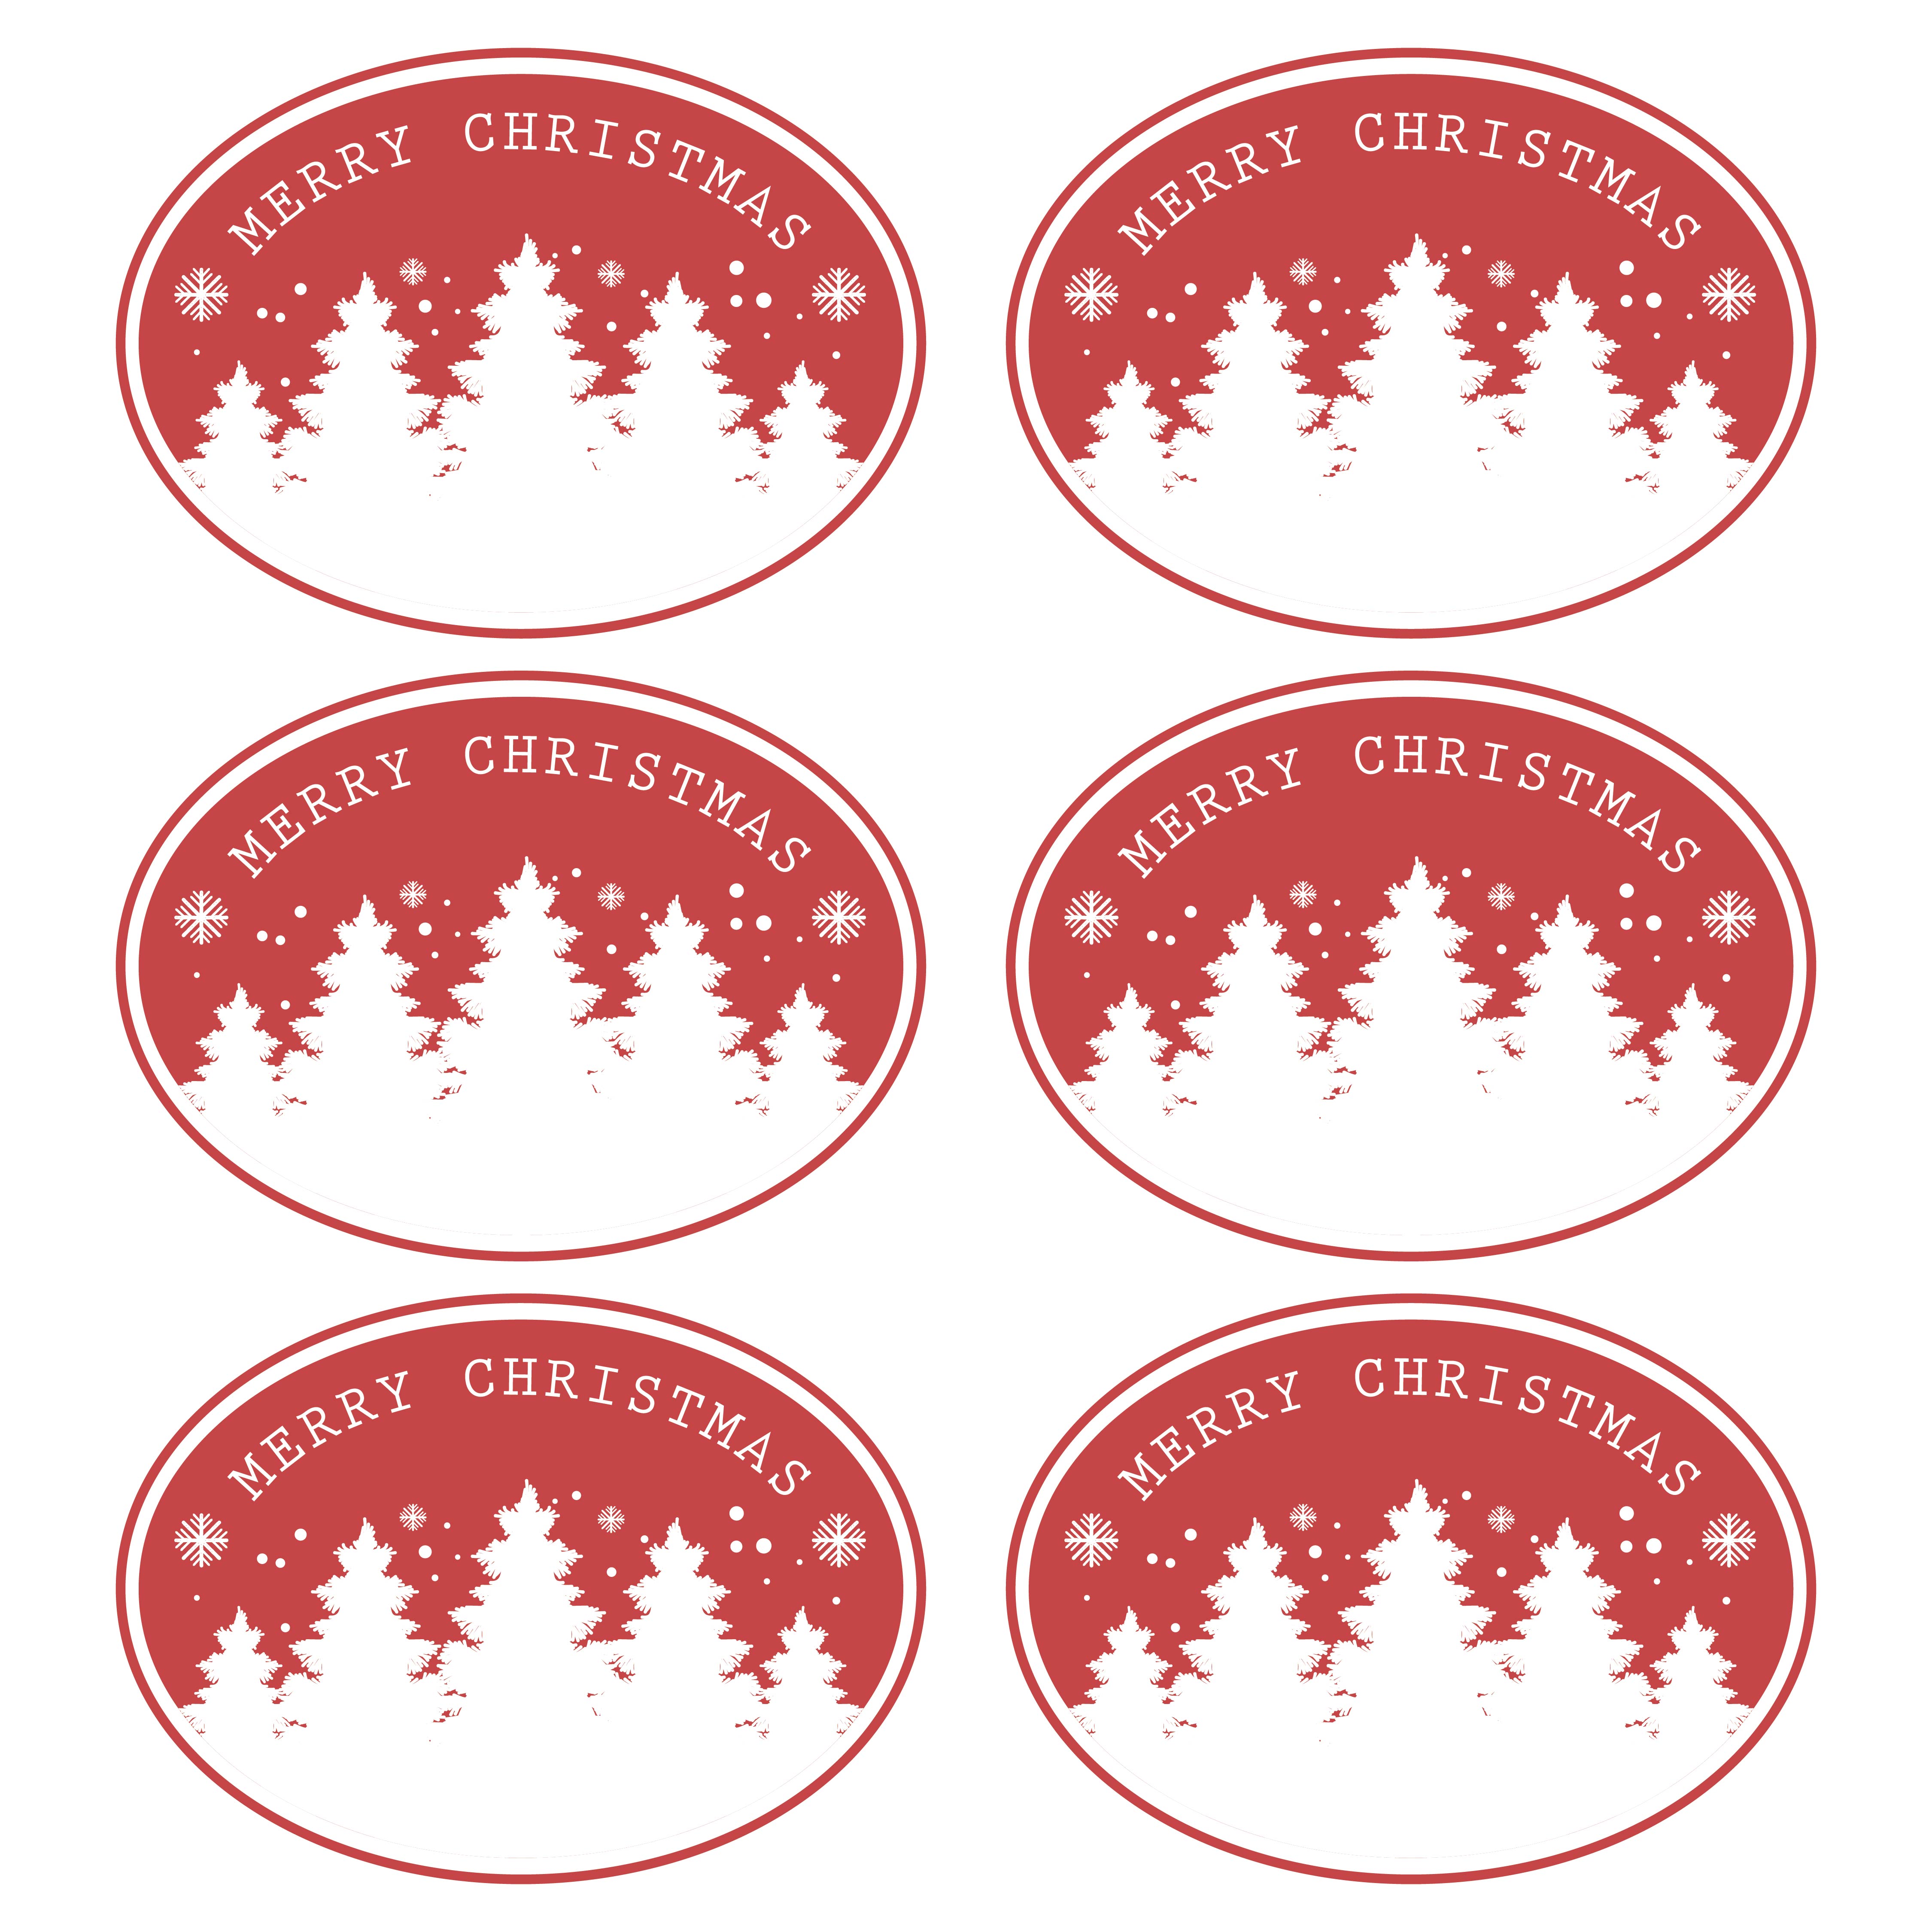 6-best-images-of-free-printable-christmas-gift-tags-pdf-free